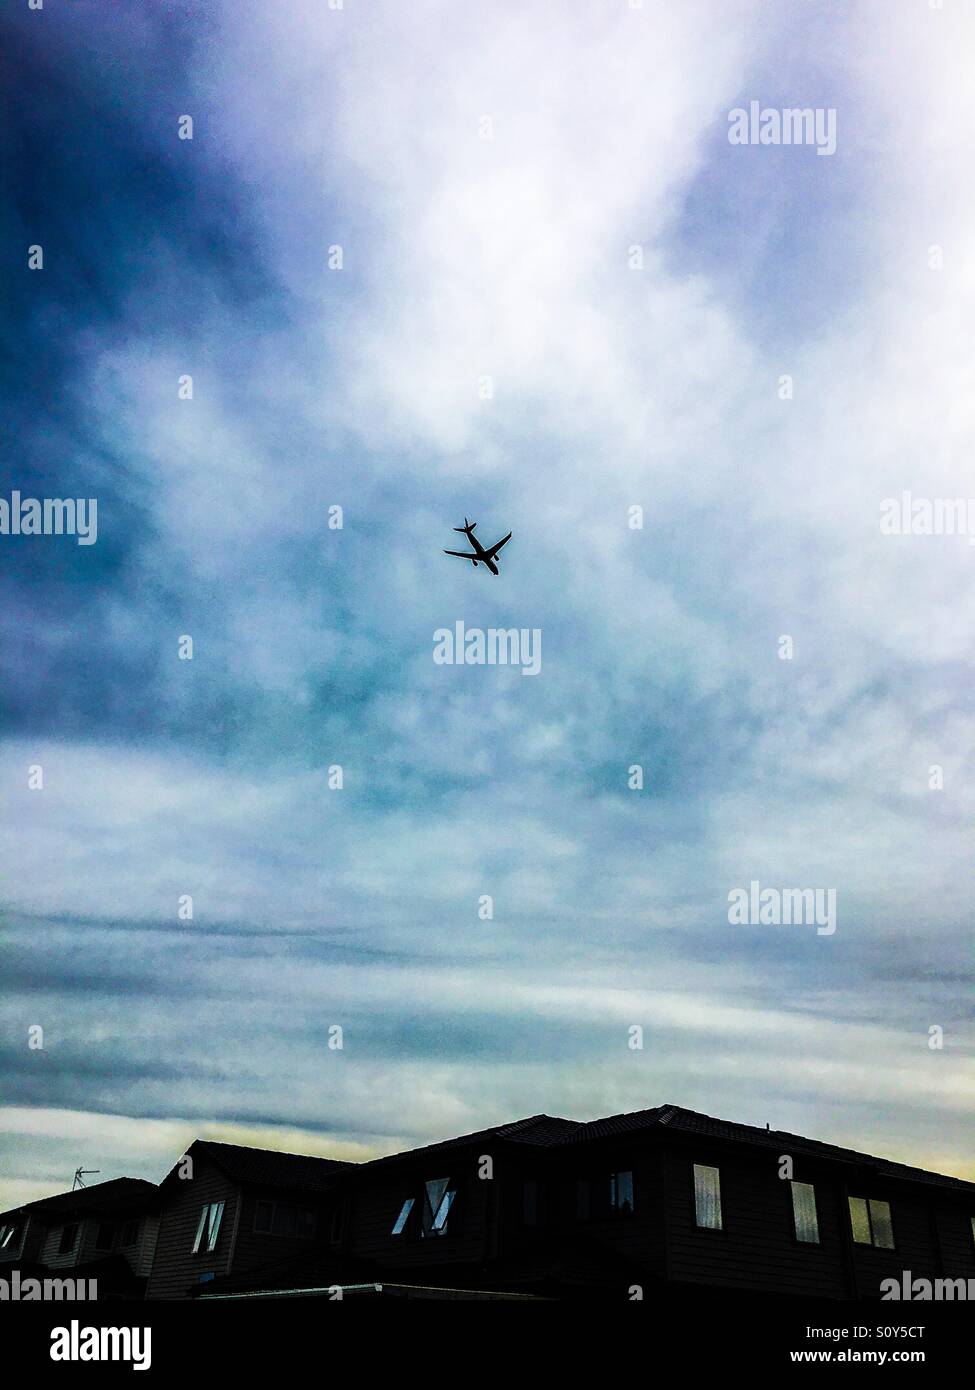 Airplane flying over the house roofs Stock Photo